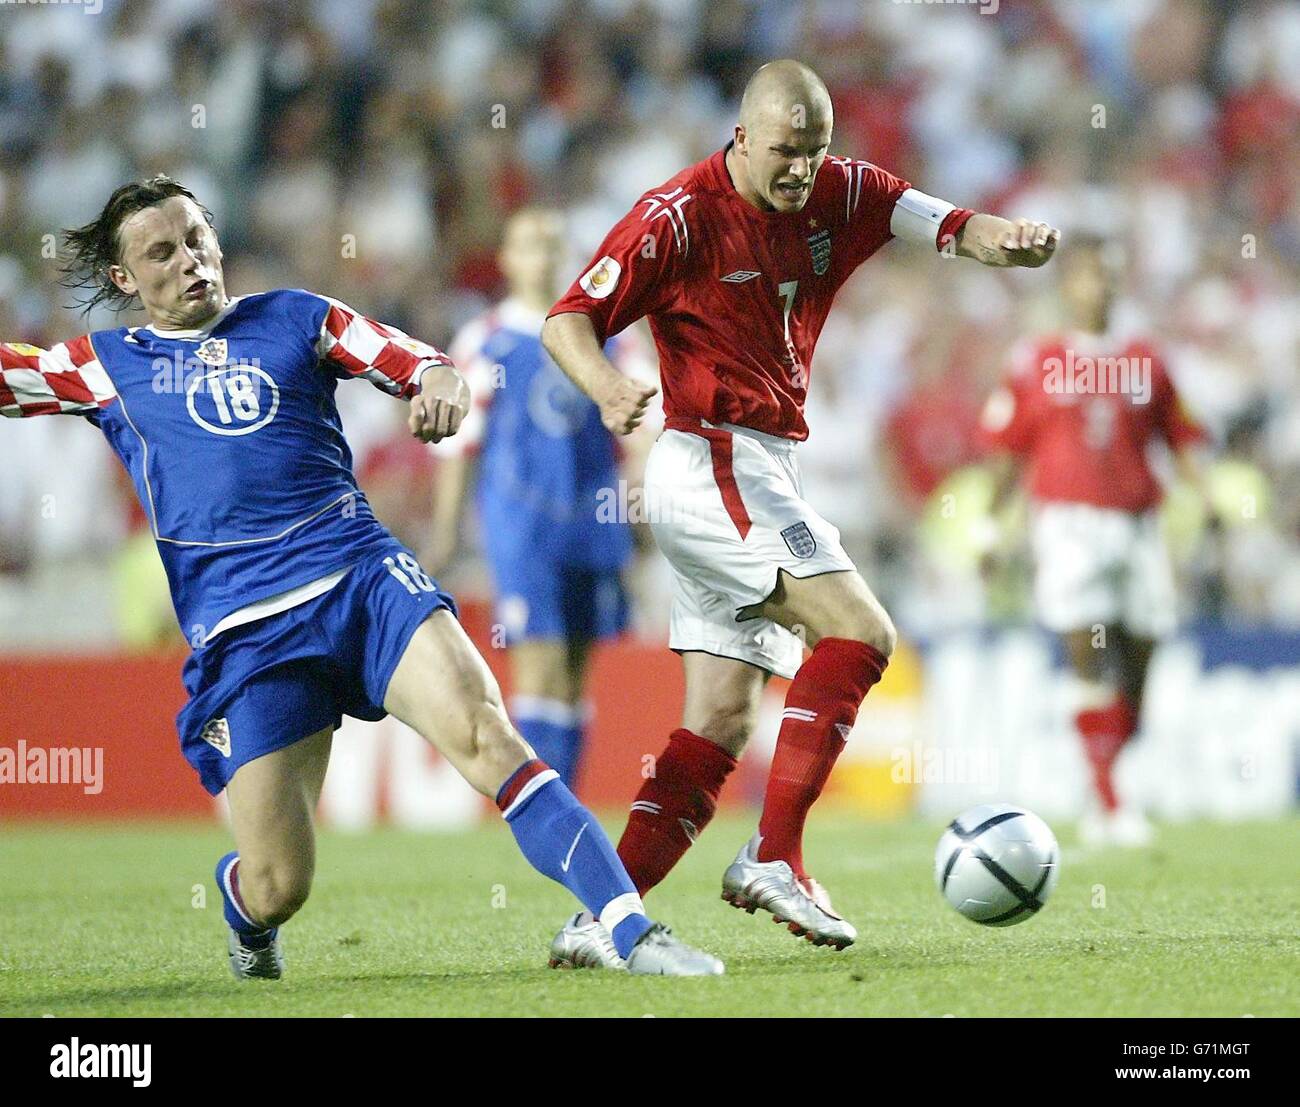 England's David Beckham is challenged by Croatia's Ivica Olic (left) during the Euro 2004, first round, group B match at the Estadio de Luz in Lisbon, Portugal. England won 4-2. Stock Photo